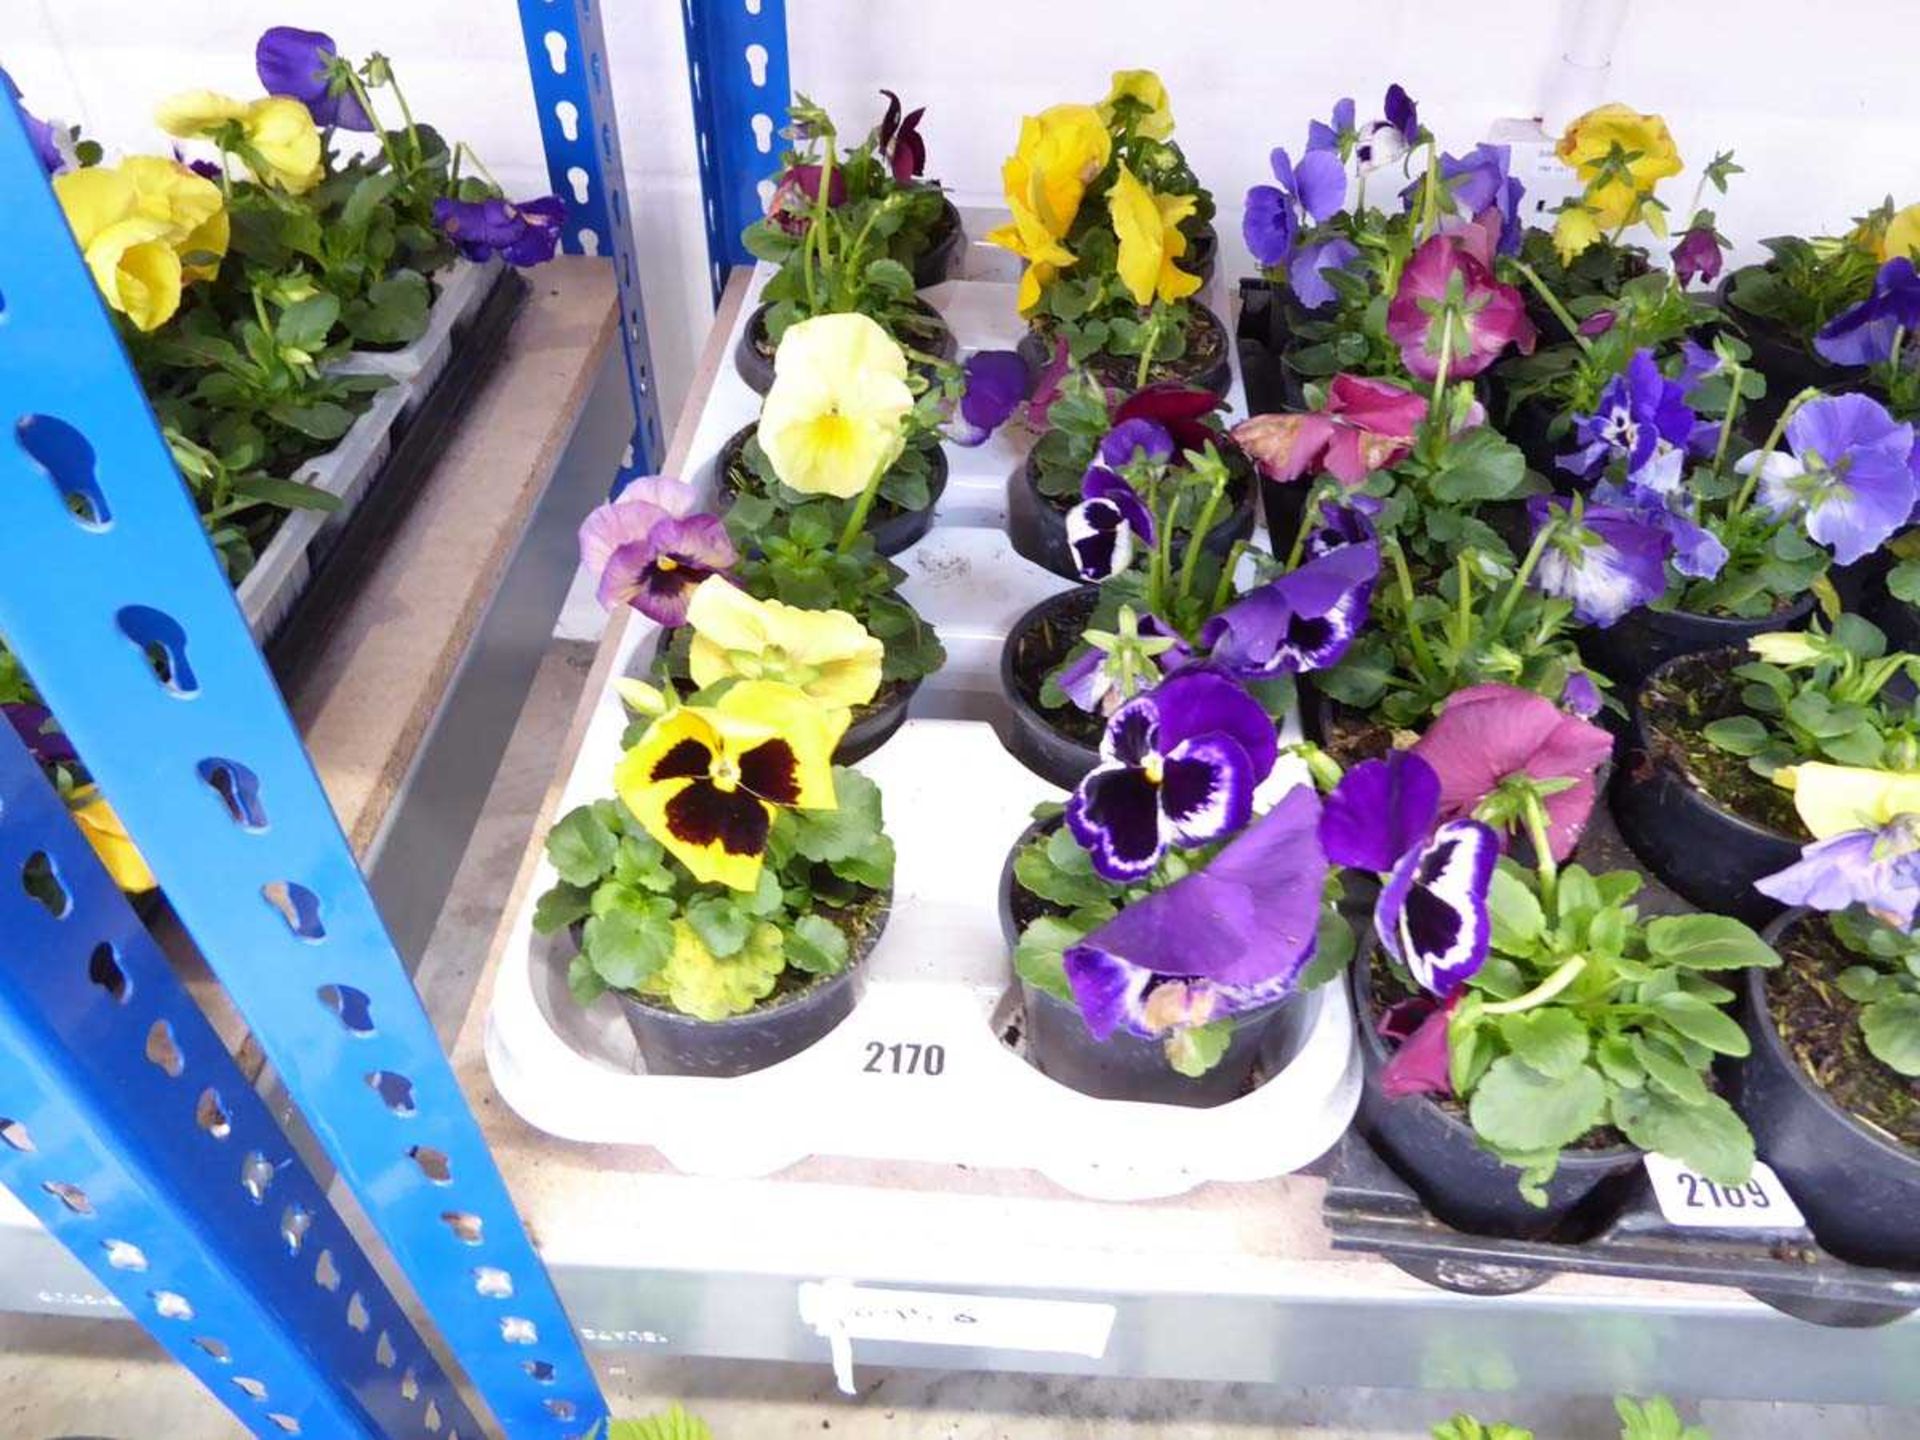 Tray containing 10 pots of pansies